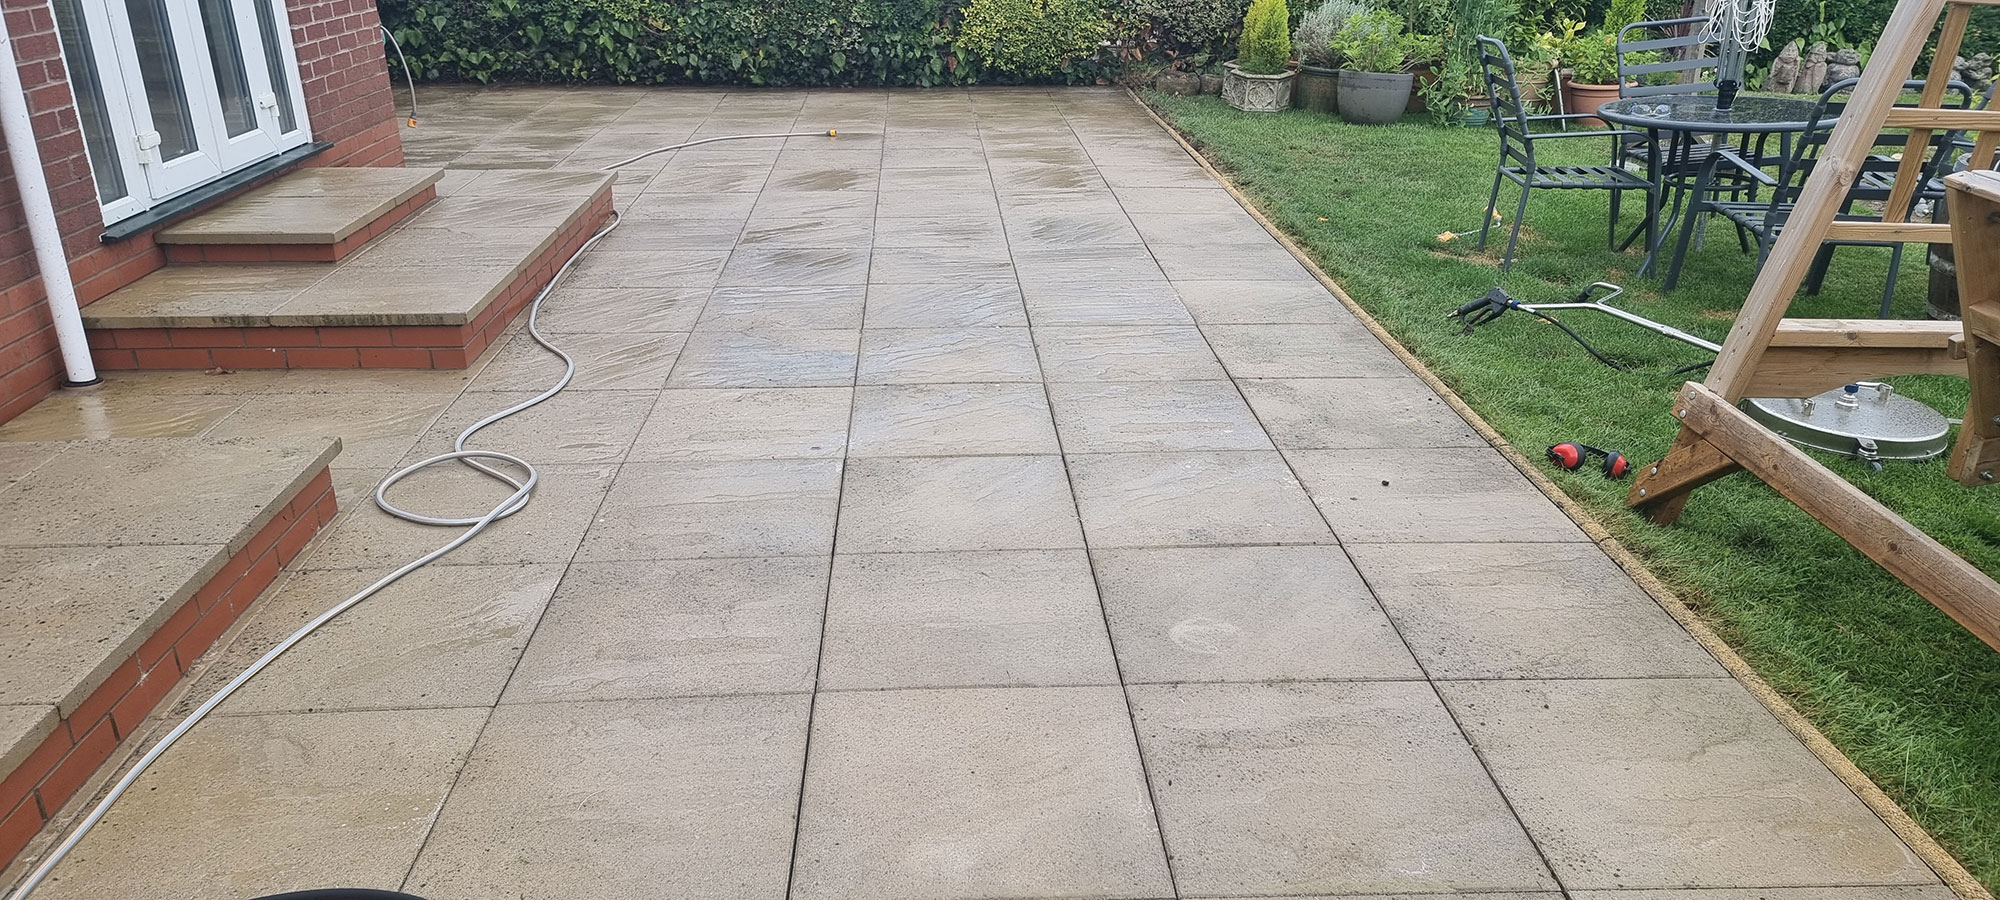 Patio after jet washing